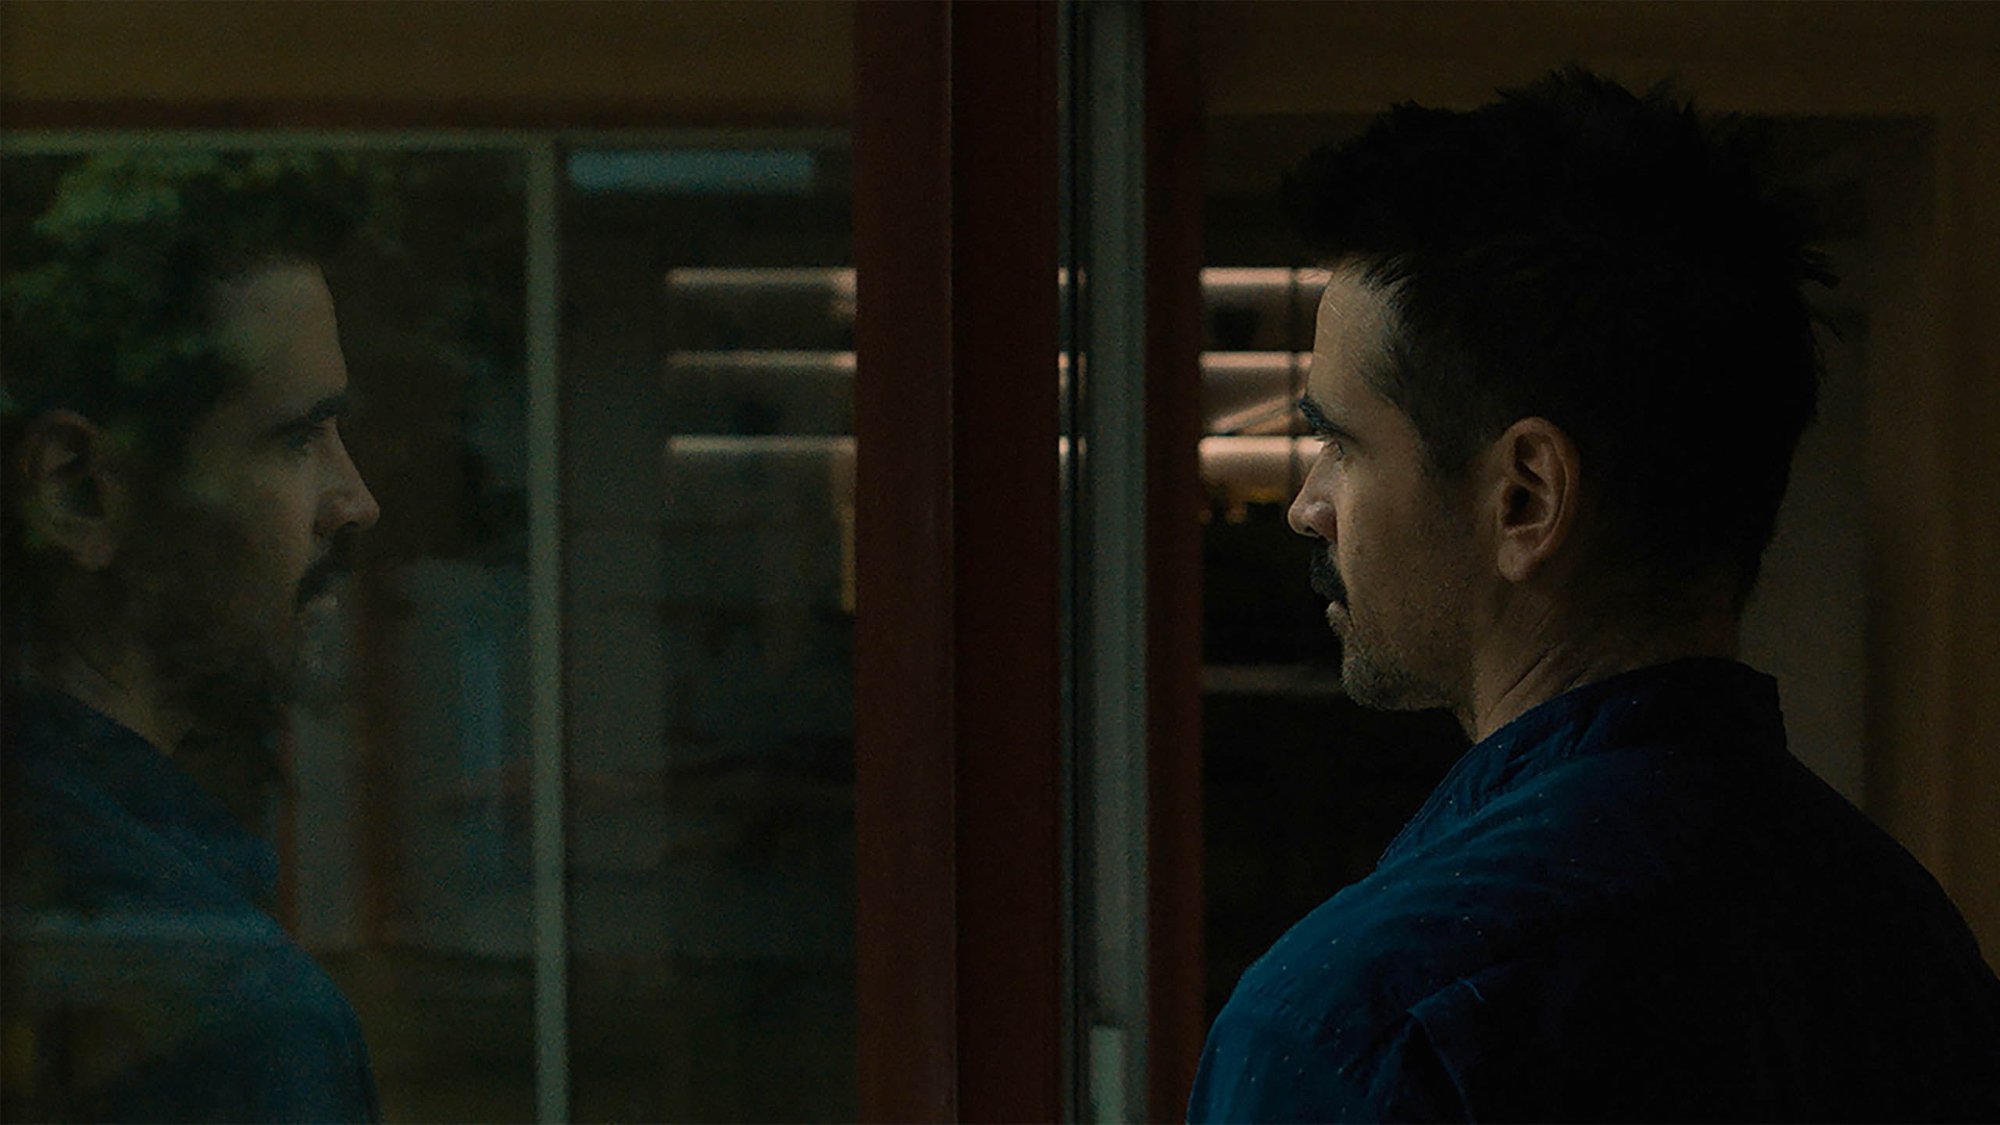 'After Yang' Colin Farrell as Jake looking out the window